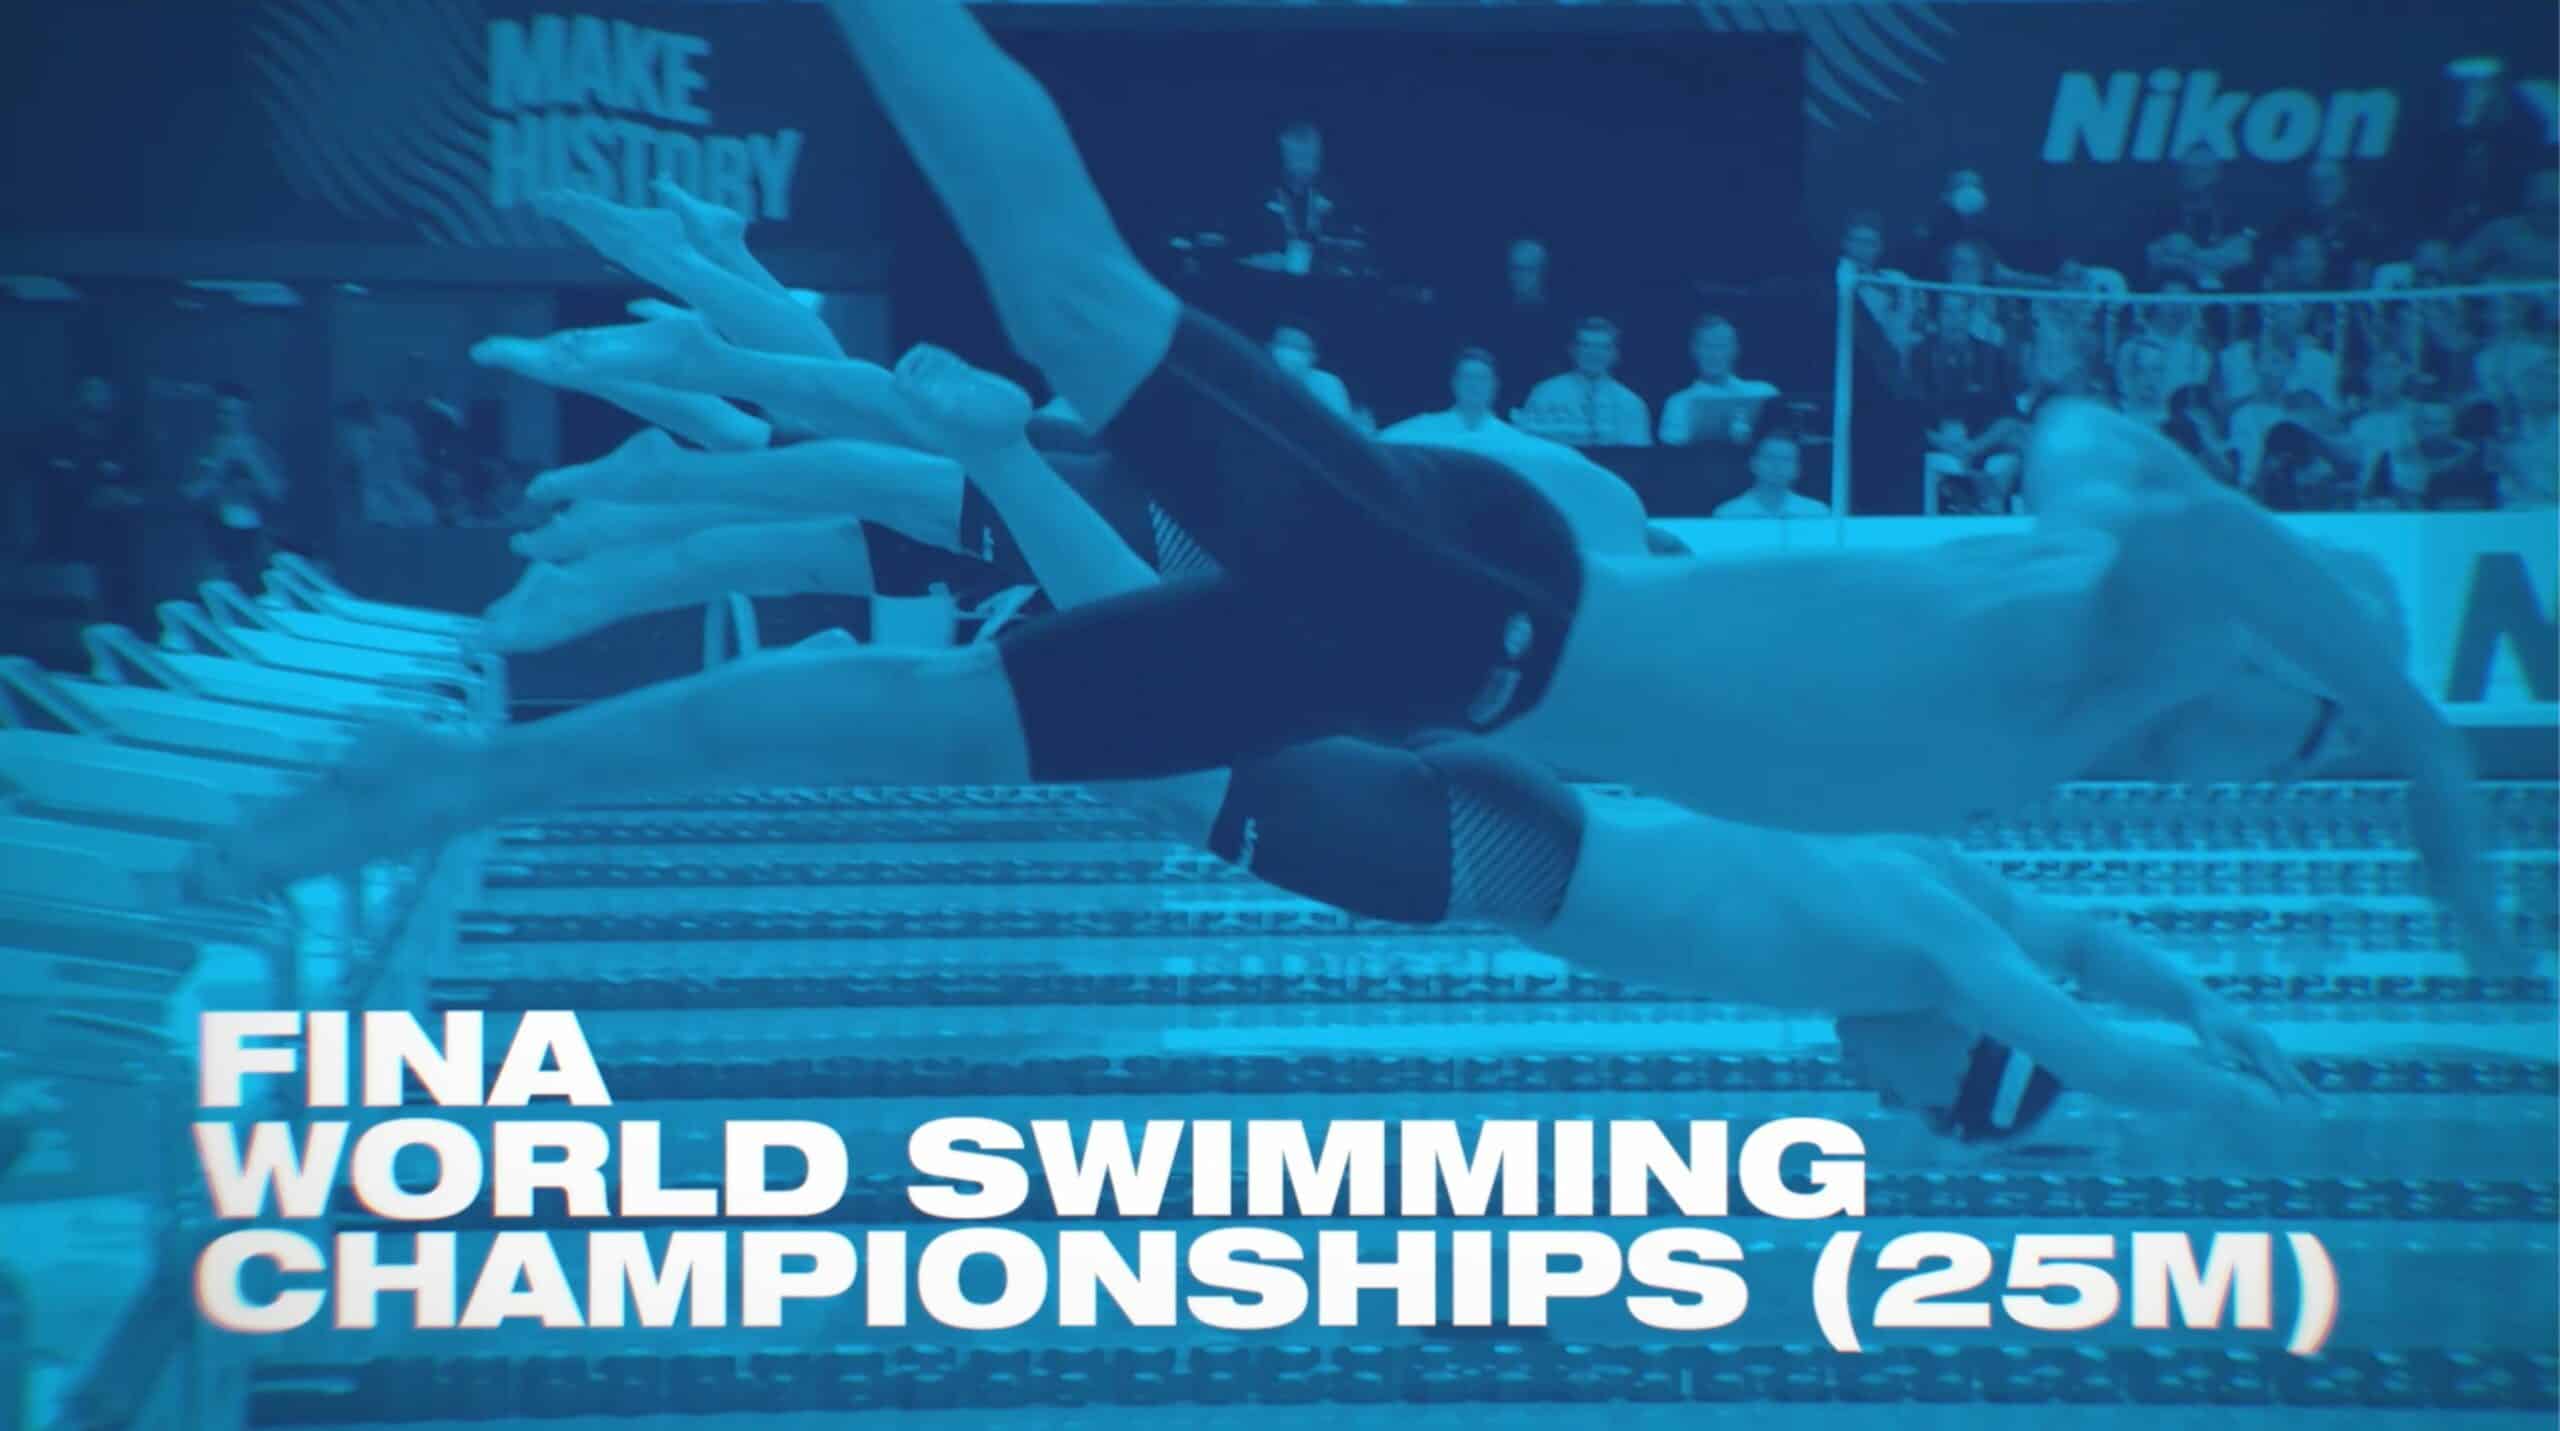 Gravity Media Australia confirms broadcast and technology undertakings to deliver complete global television coverage of the FINA World Swimming Championships (25m) in Melbourne